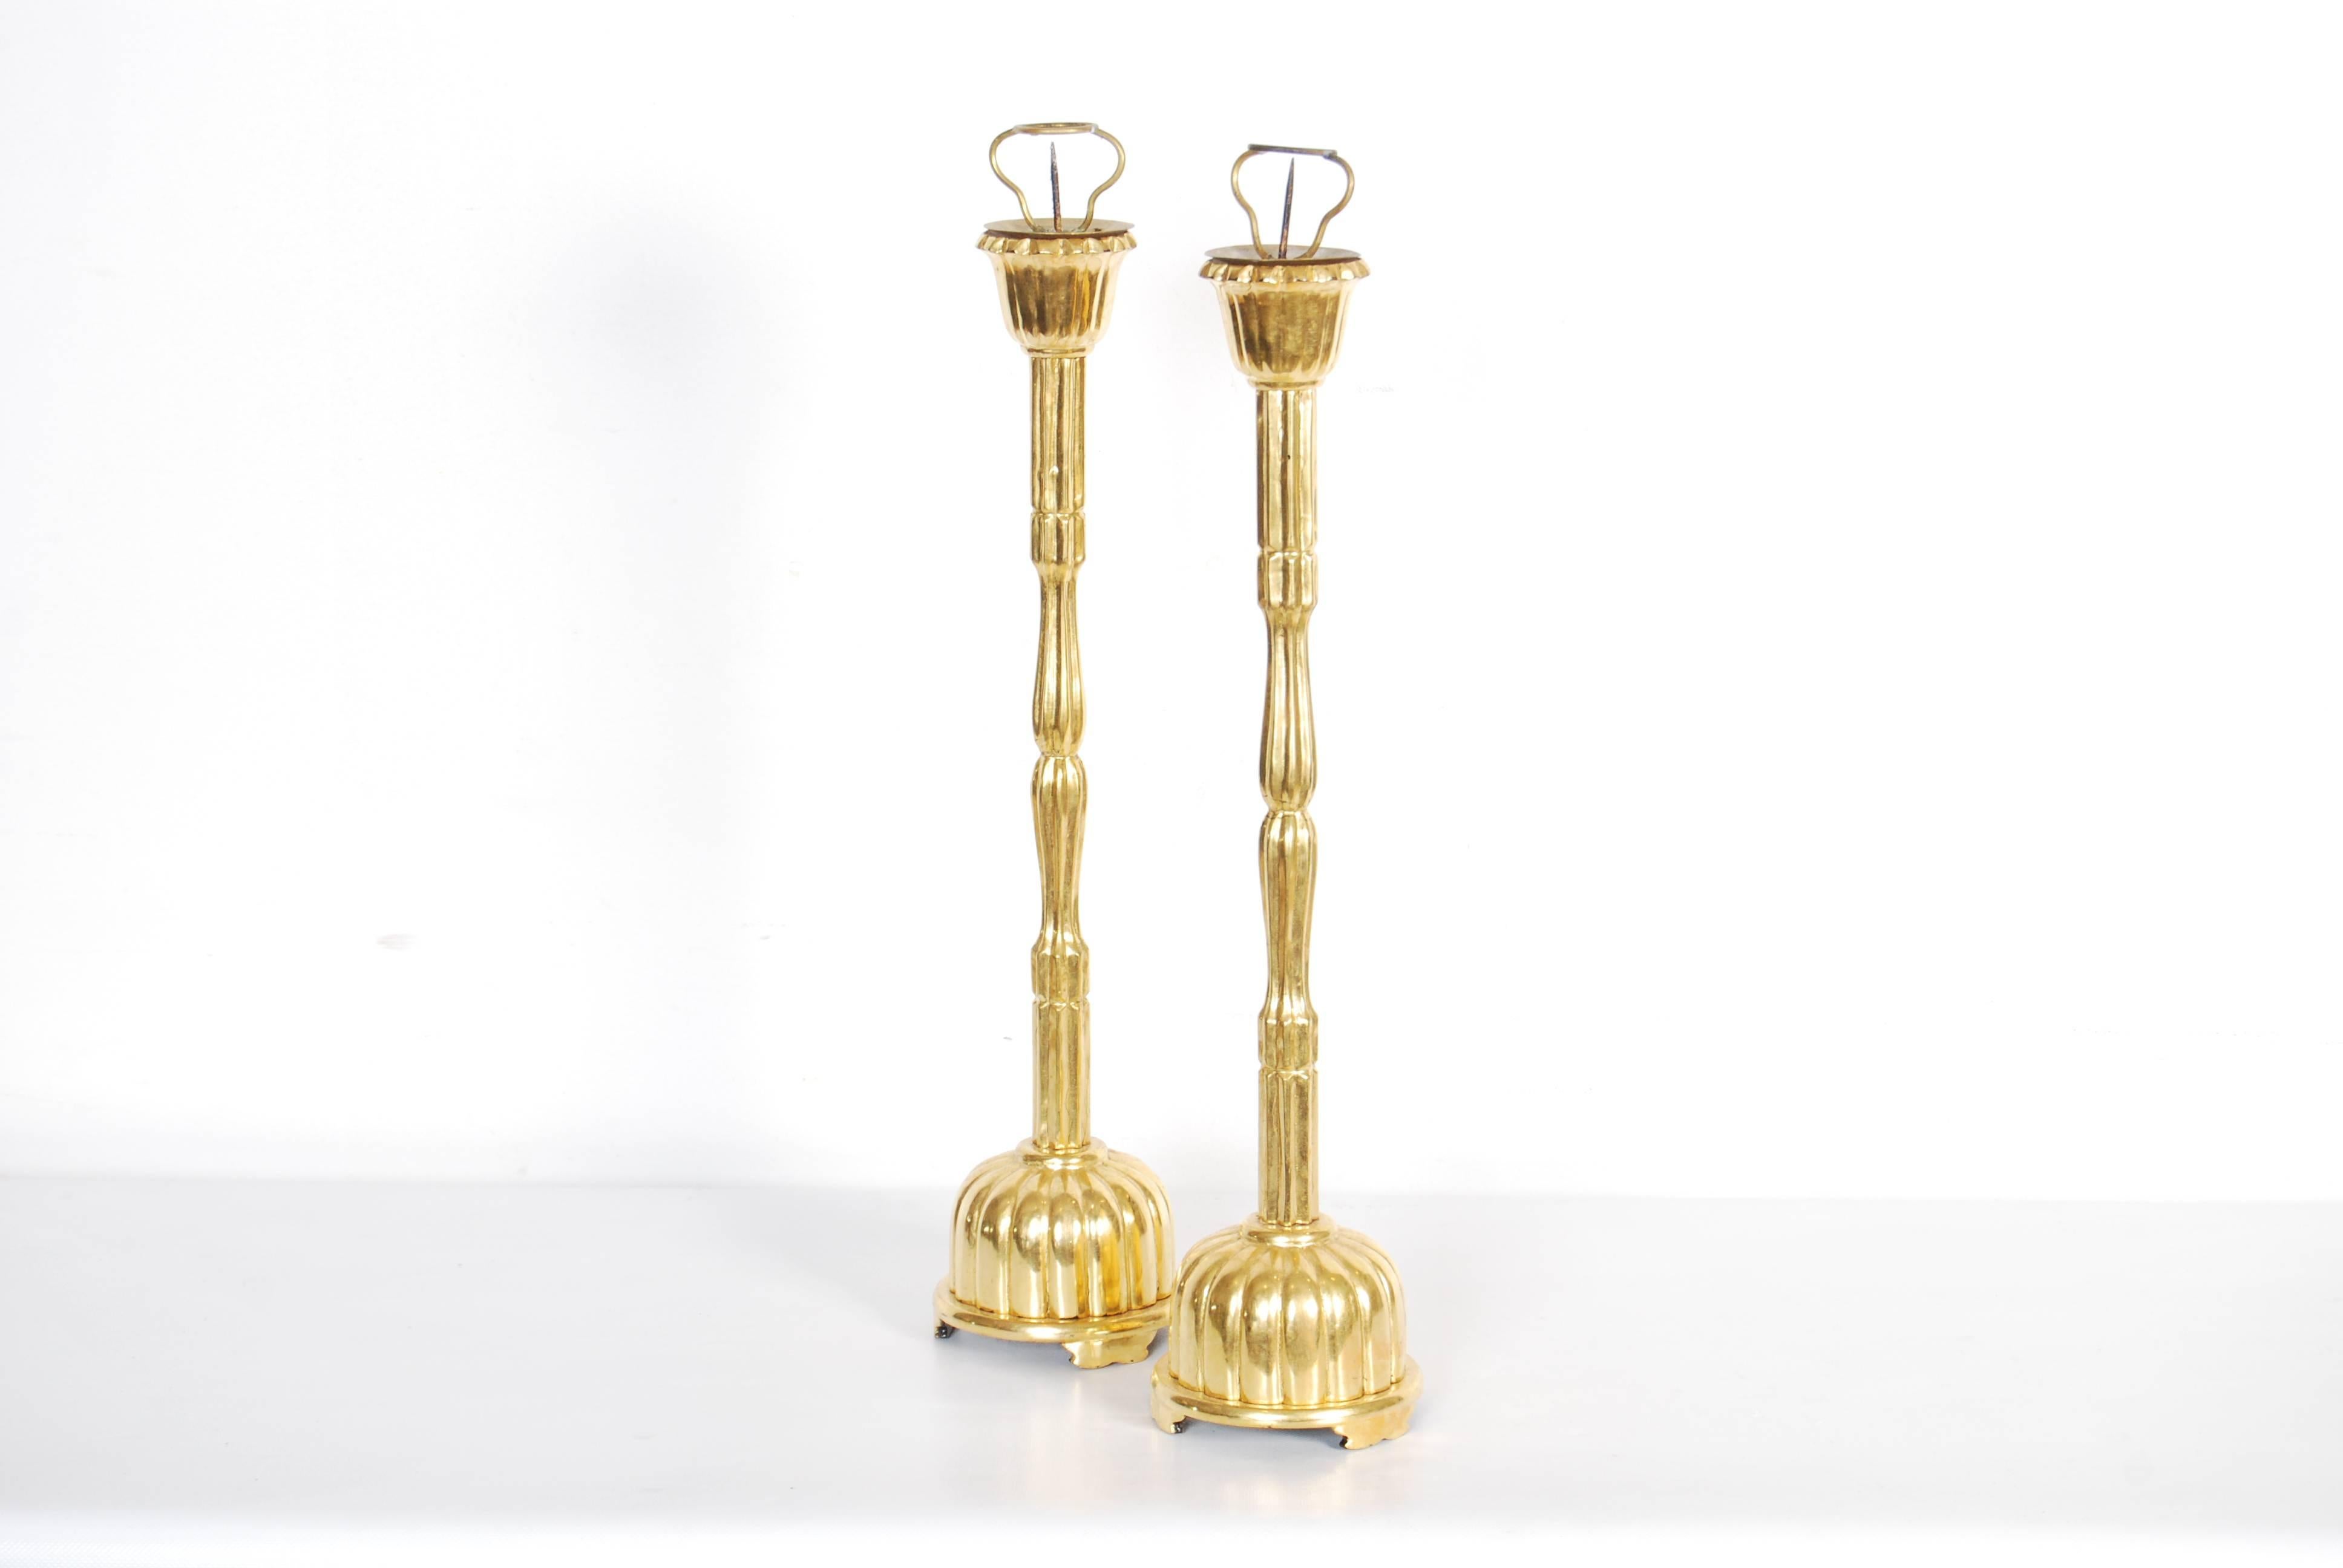 Pair of Japanese hand-carved, lacquered and gilded Buddhist candle stands of fine quality, with gilding in excellent condition, Meiji period, early 20th century

Dimensions: H 50cm x D 10cm.